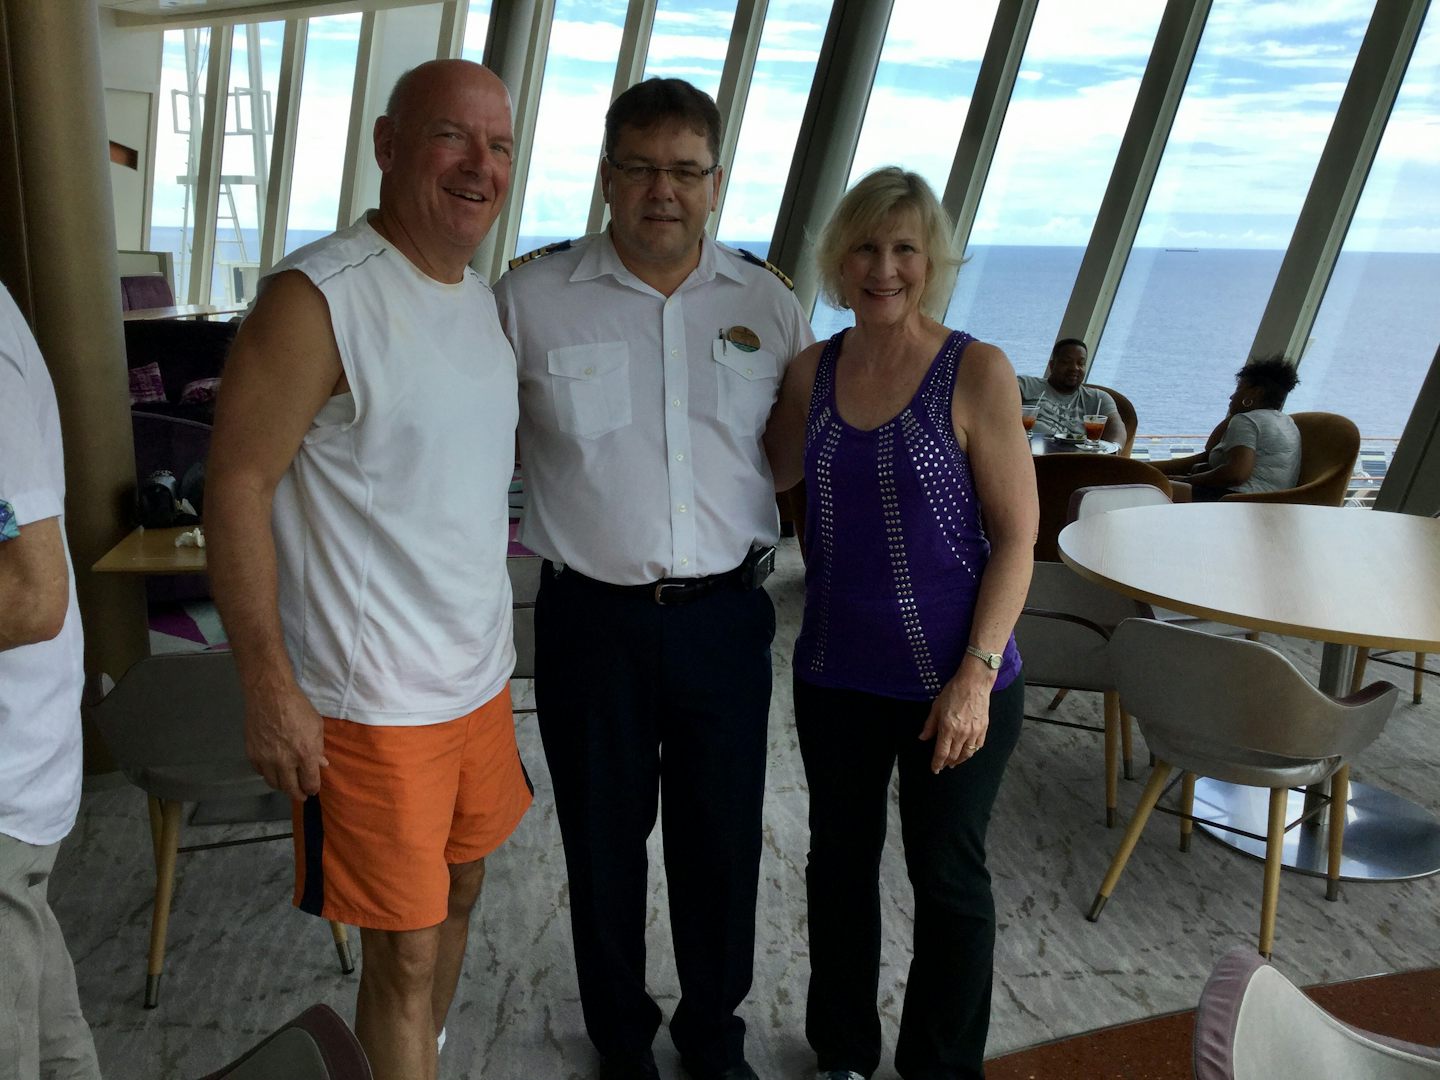 Awesome Cruise on the Oasis of the Seas with Captain Per.
September 24th 2